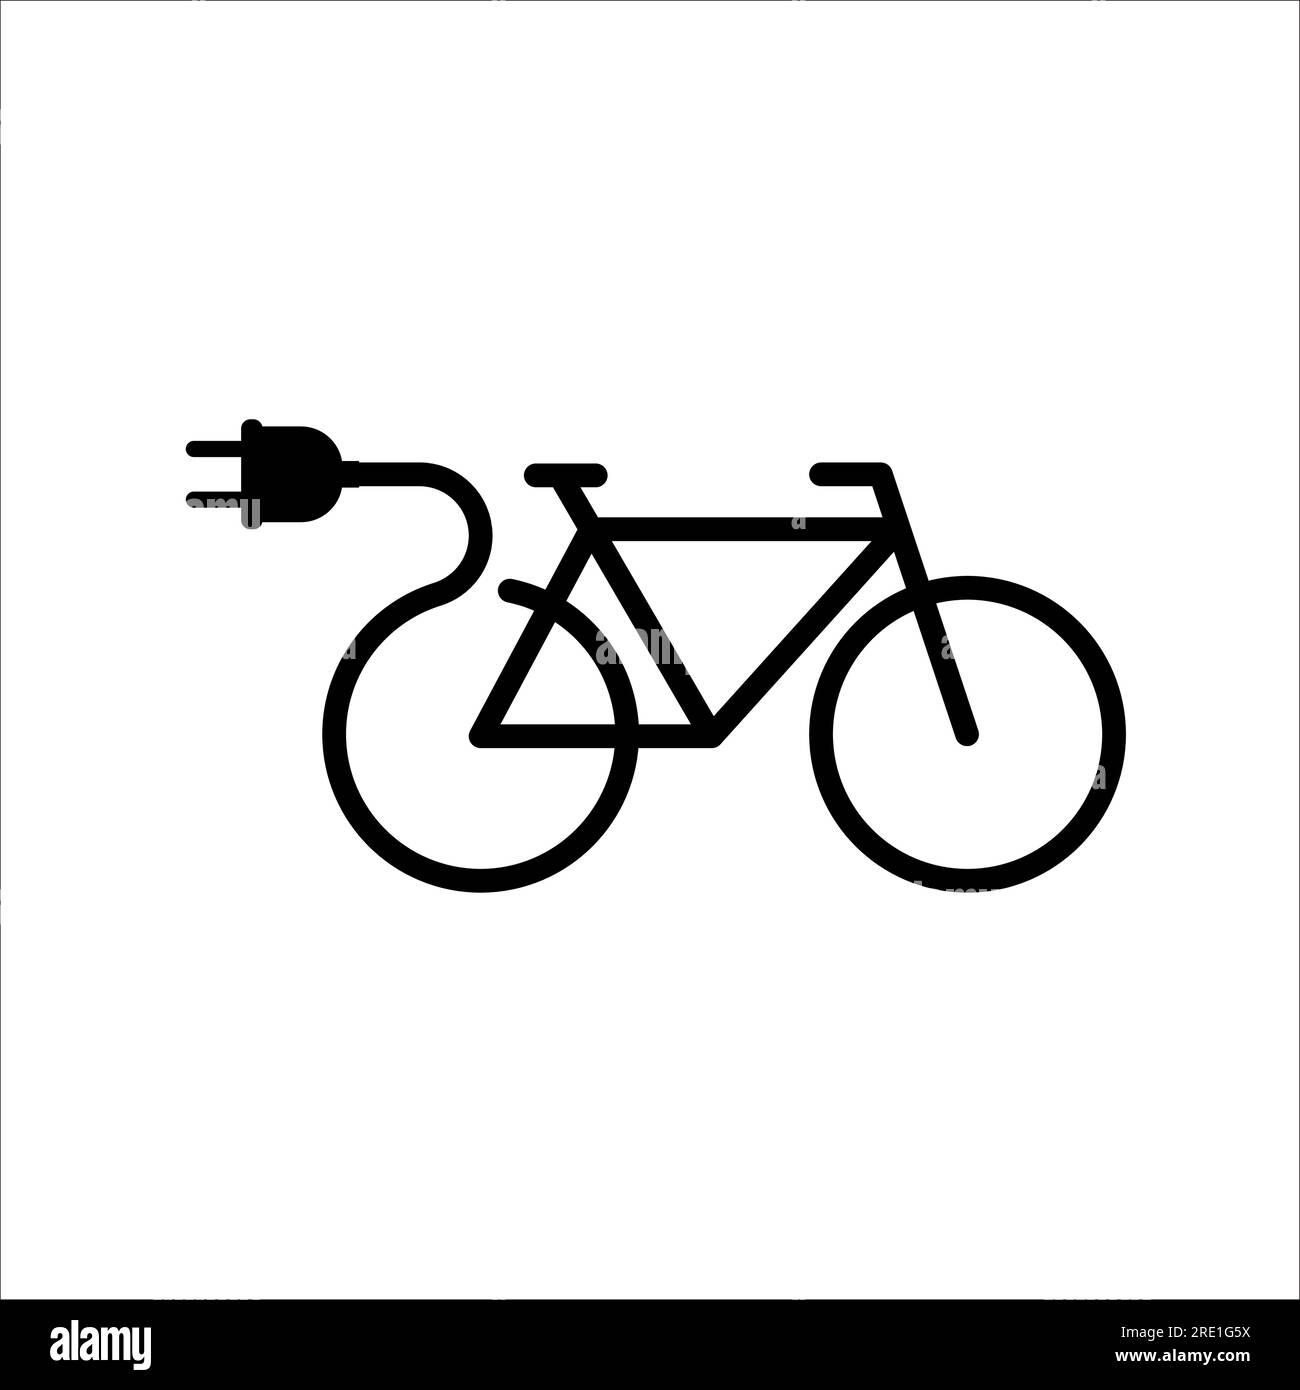 Electro bicycle icon line style Stock Vector